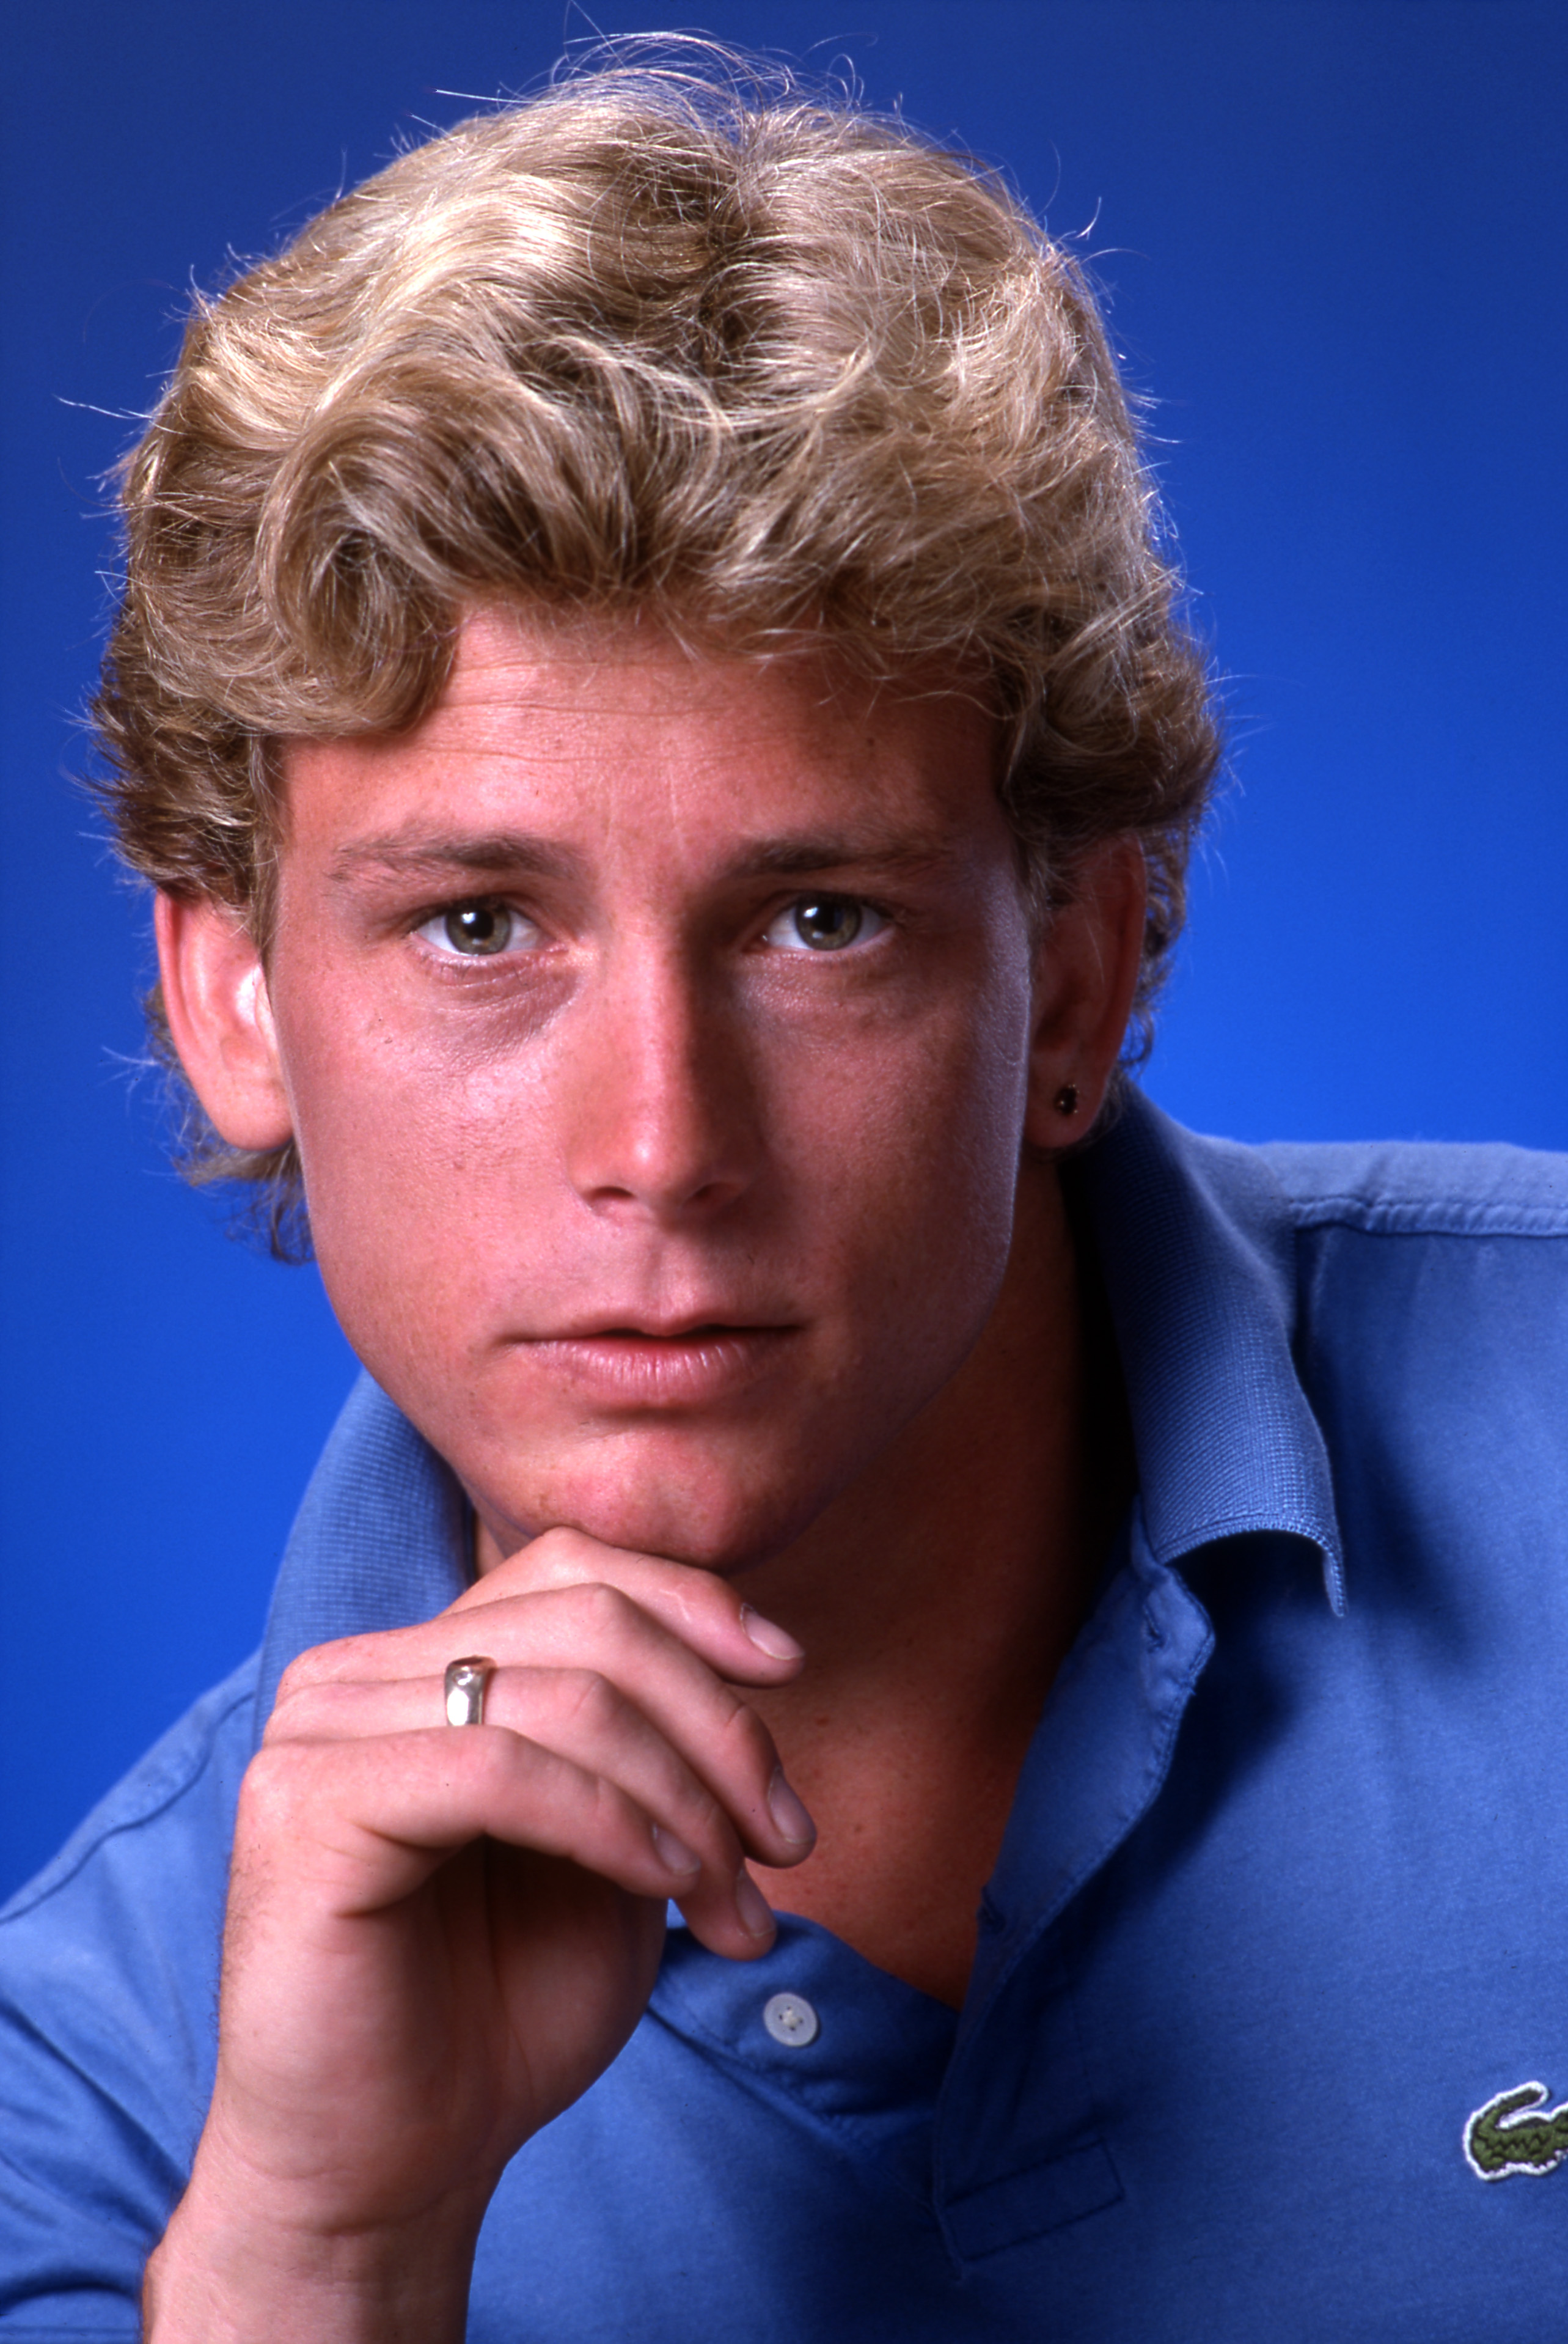 A portrait of Willie Aames circa 1983. | Source: Getty Images